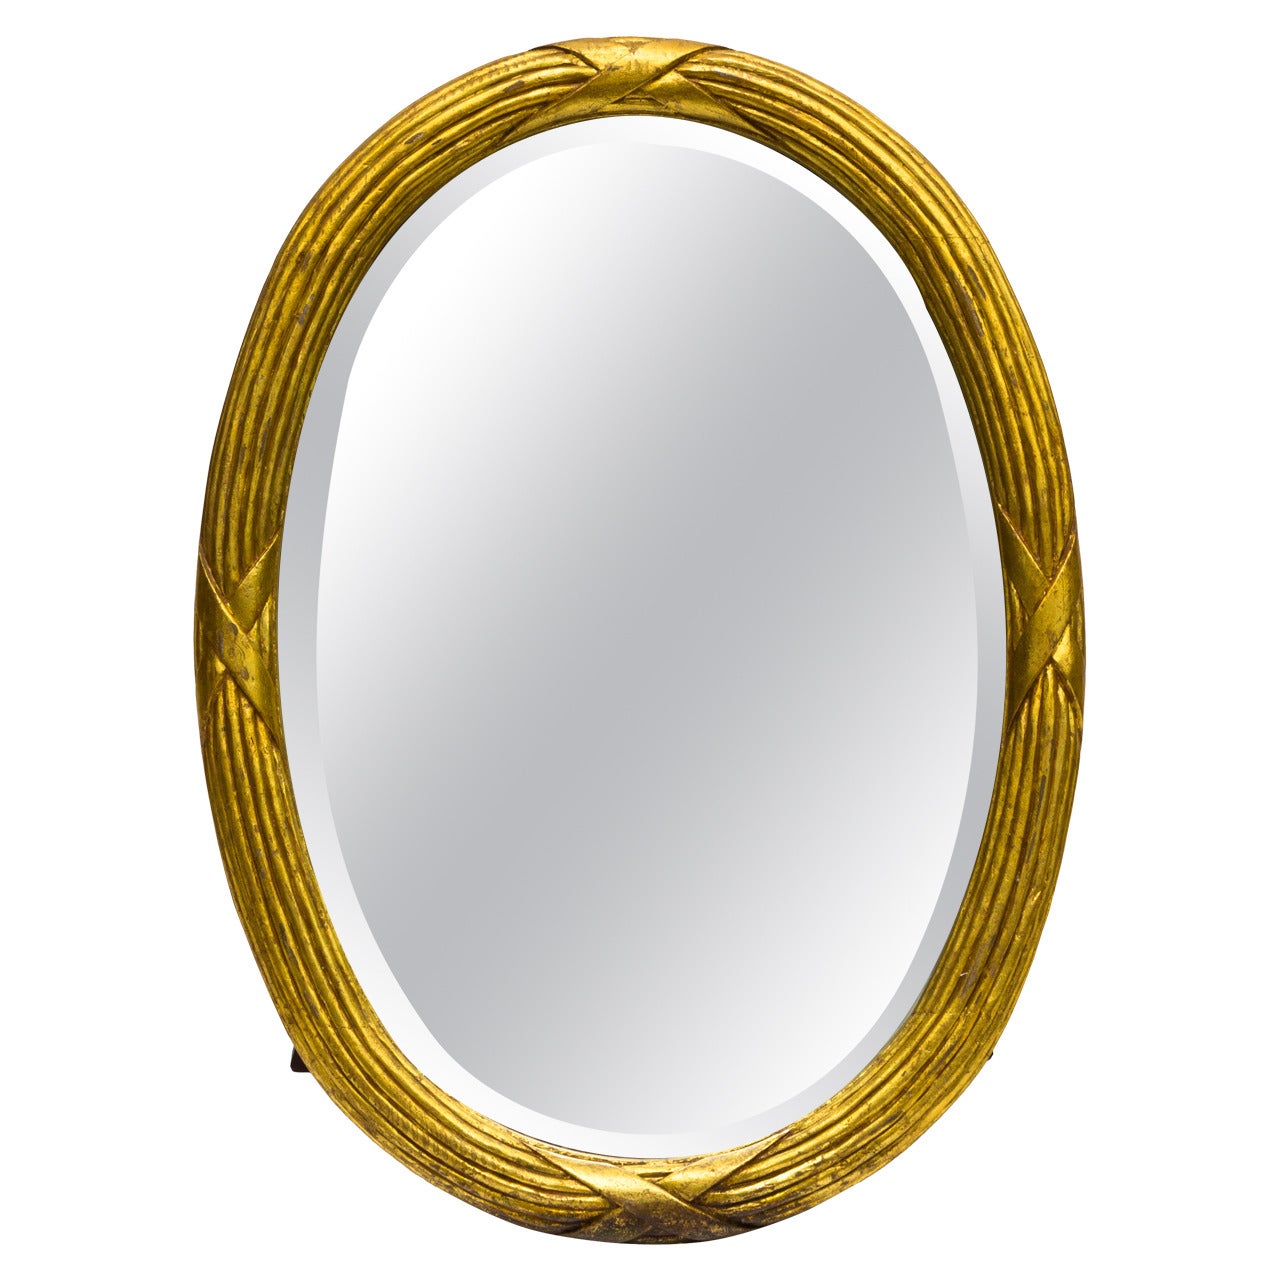 Carved Italian Giltwood Oval Mirror